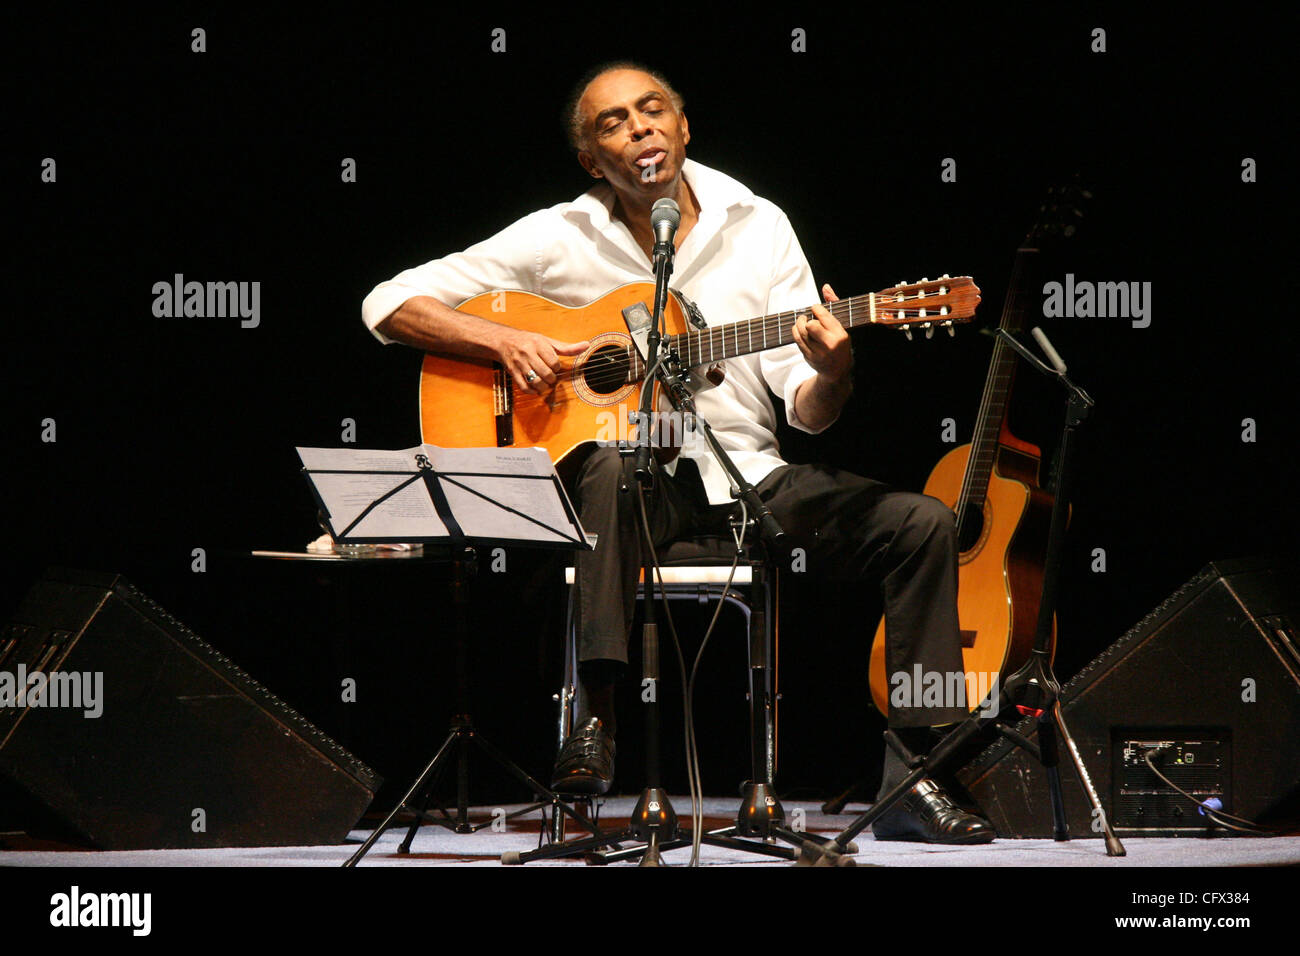 Brazilian Singer Songwriter Gilberto Gil Performing At The Carnegie